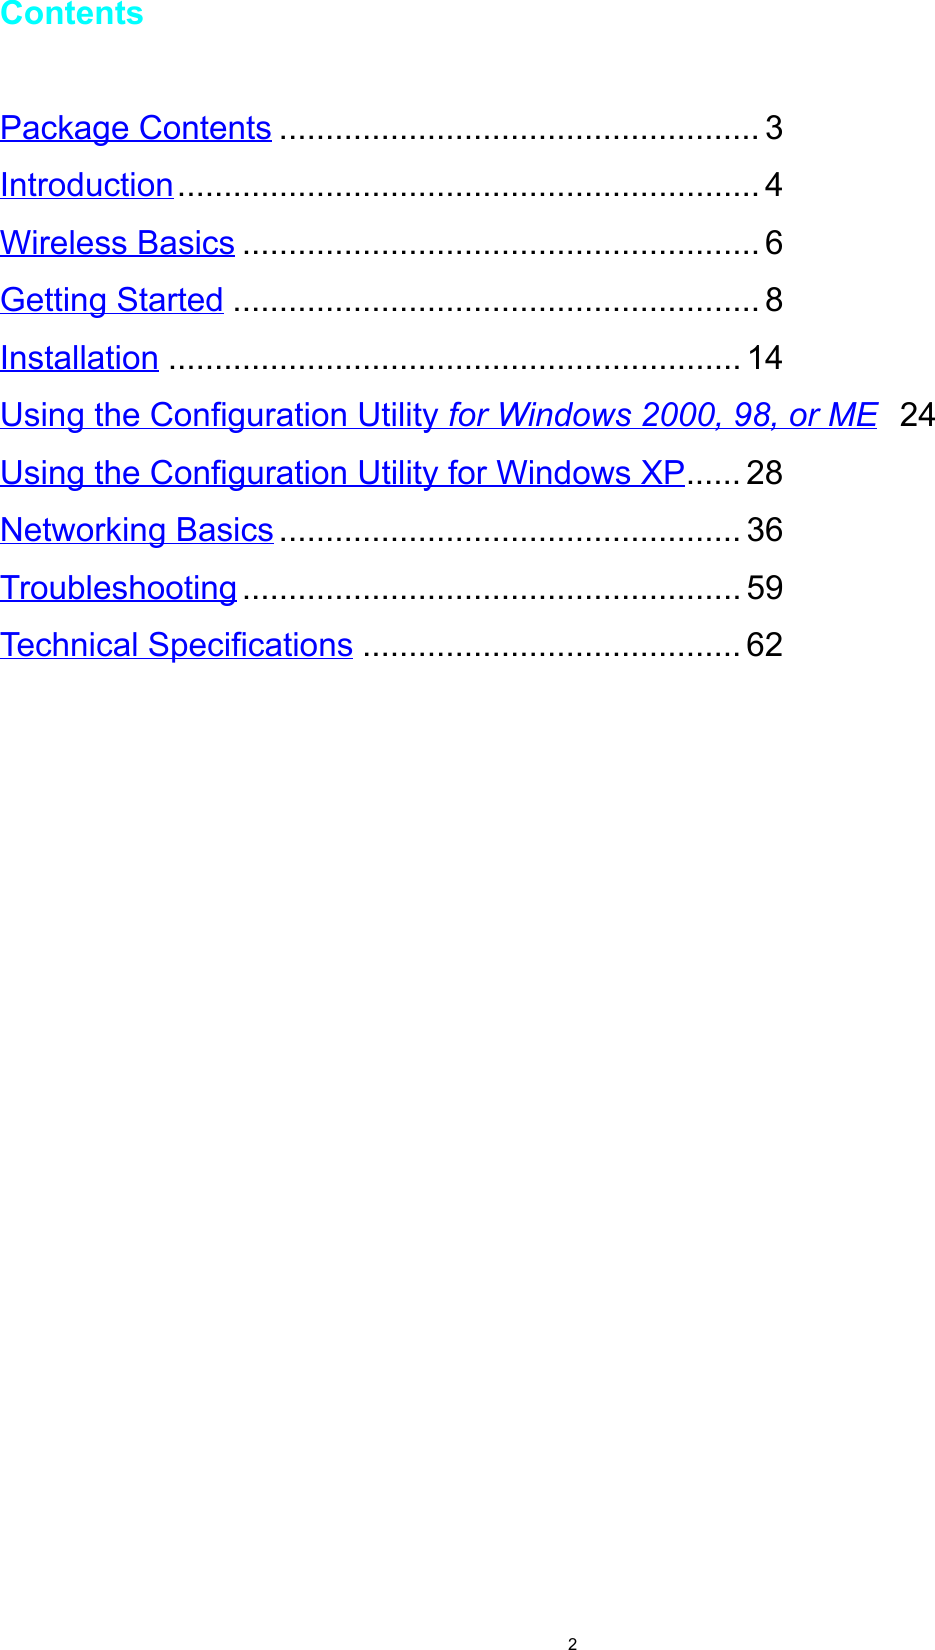 2ContentsPackage Contents .................................................... 3Introduction............................................................... 4Wireless Basics ........................................................ 6Getting Started ......................................................... 8Installation .............................................................. 14Using the Configuration Utility for Windows 2000, 98, or ME 24Using the Configuration Utility for Windows XP...... 28Networking Basics .................................................. 36Troubleshooting ...................................................... 59Technical Specifications ......................................... 62